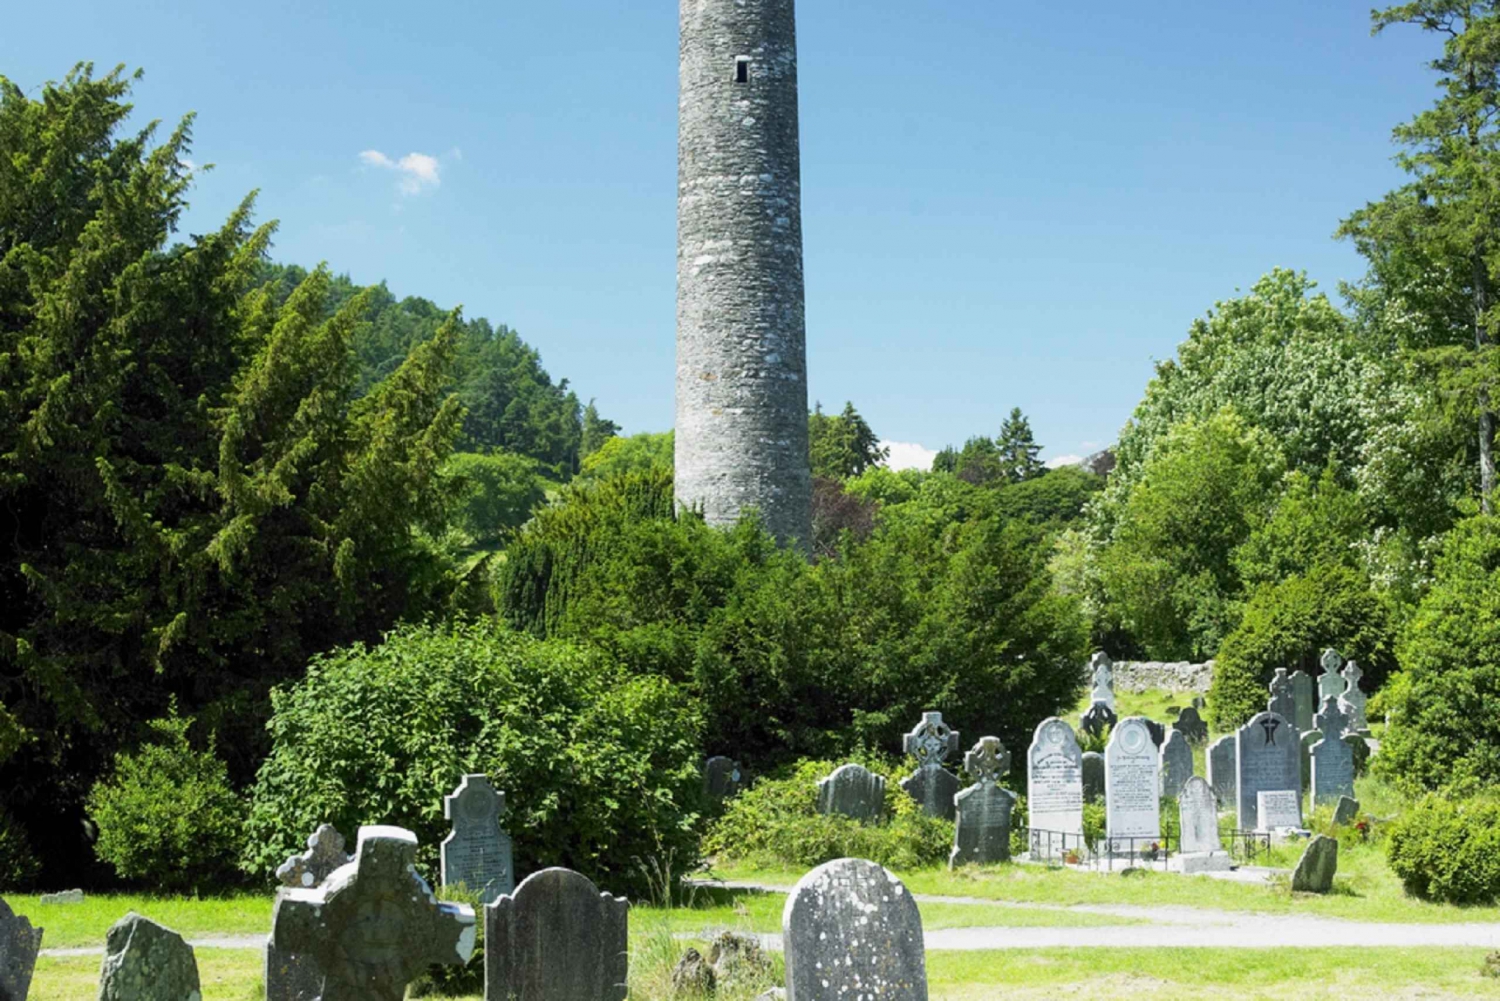 From Dublin: Wicklow and Glendalough Tour